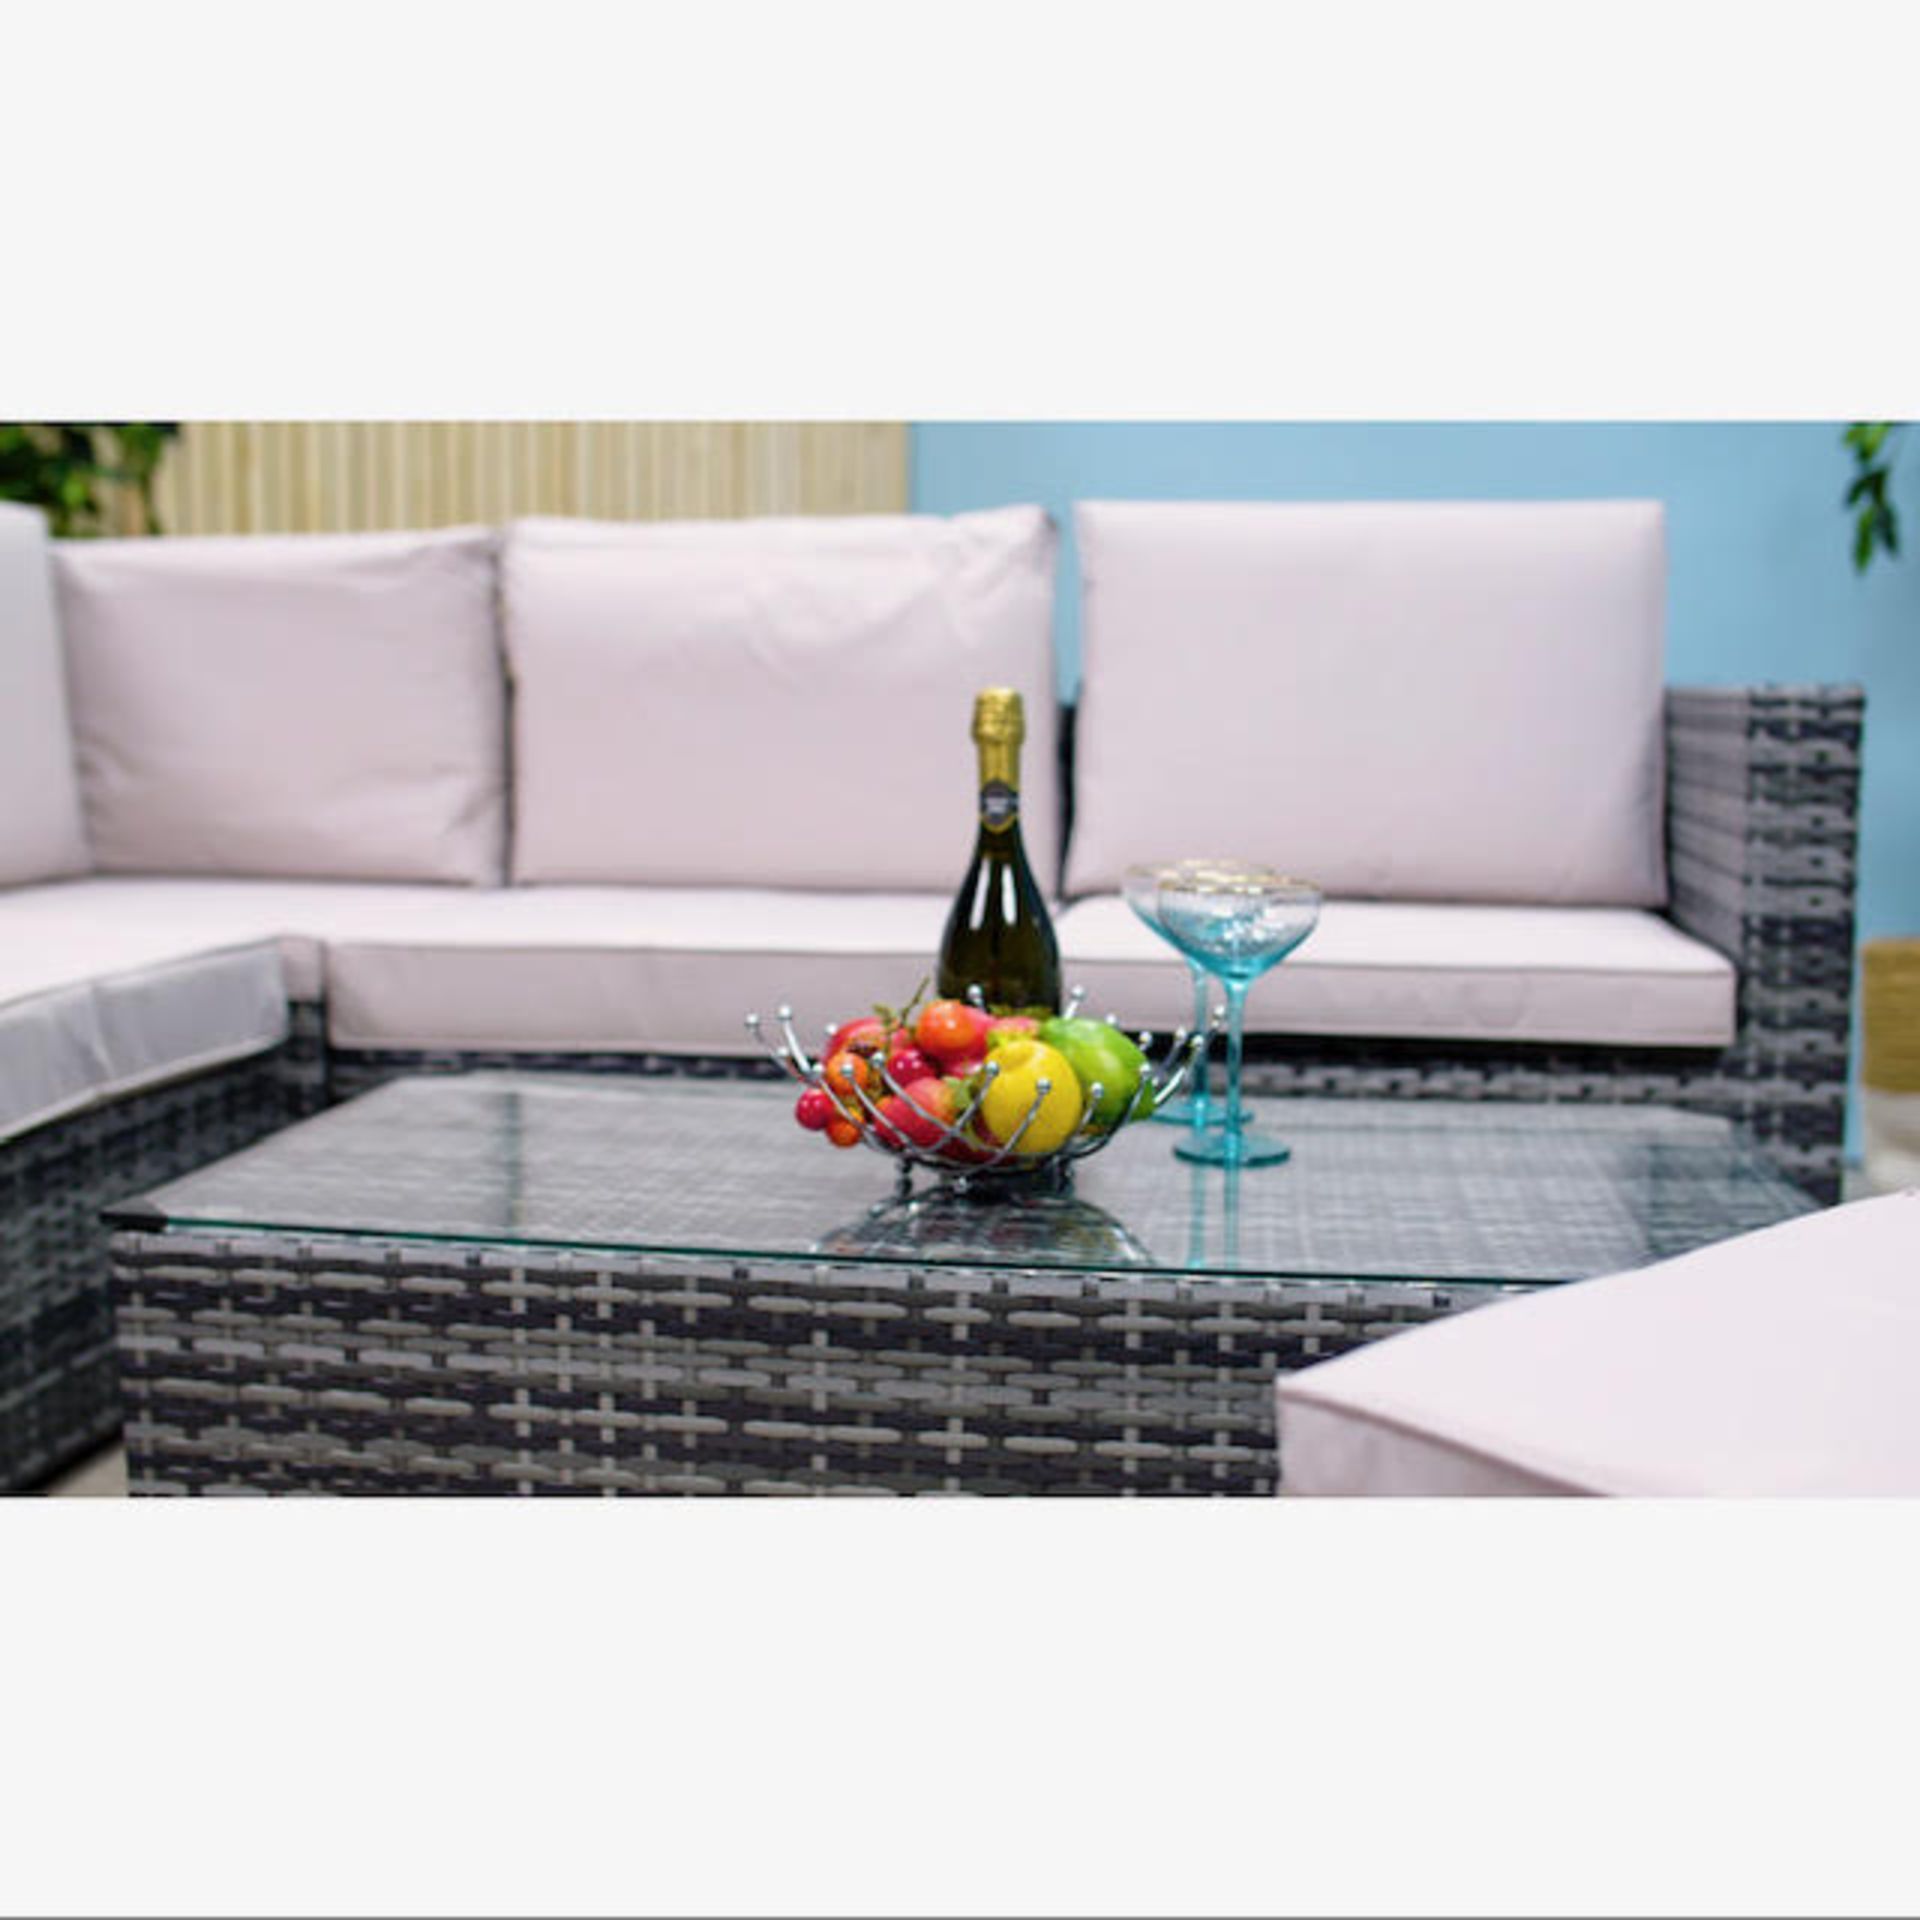 TRADE LOT 5 X BRAND NEW LINEA 7 PIECE LUXURY RATTAN SETS RRP £1499 EACH. PERFECT FOR THOSE SUMMER - Image 5 of 6